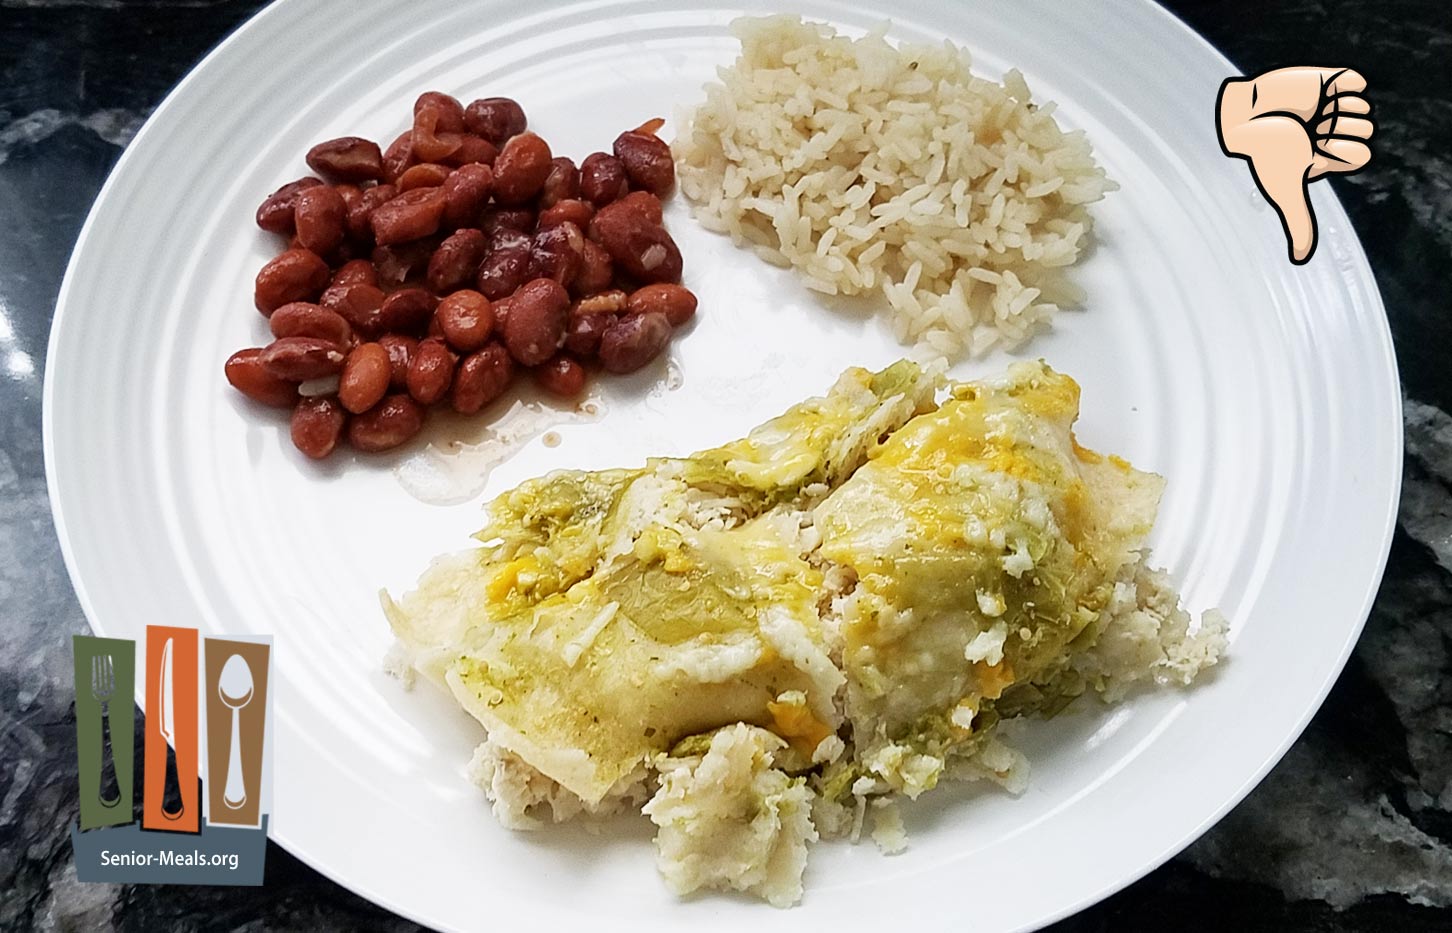 MK Signature Meal - Chicken Cheese Enchilada with Tomatillo Sauce, Rice and Pinto Beans - $12.50